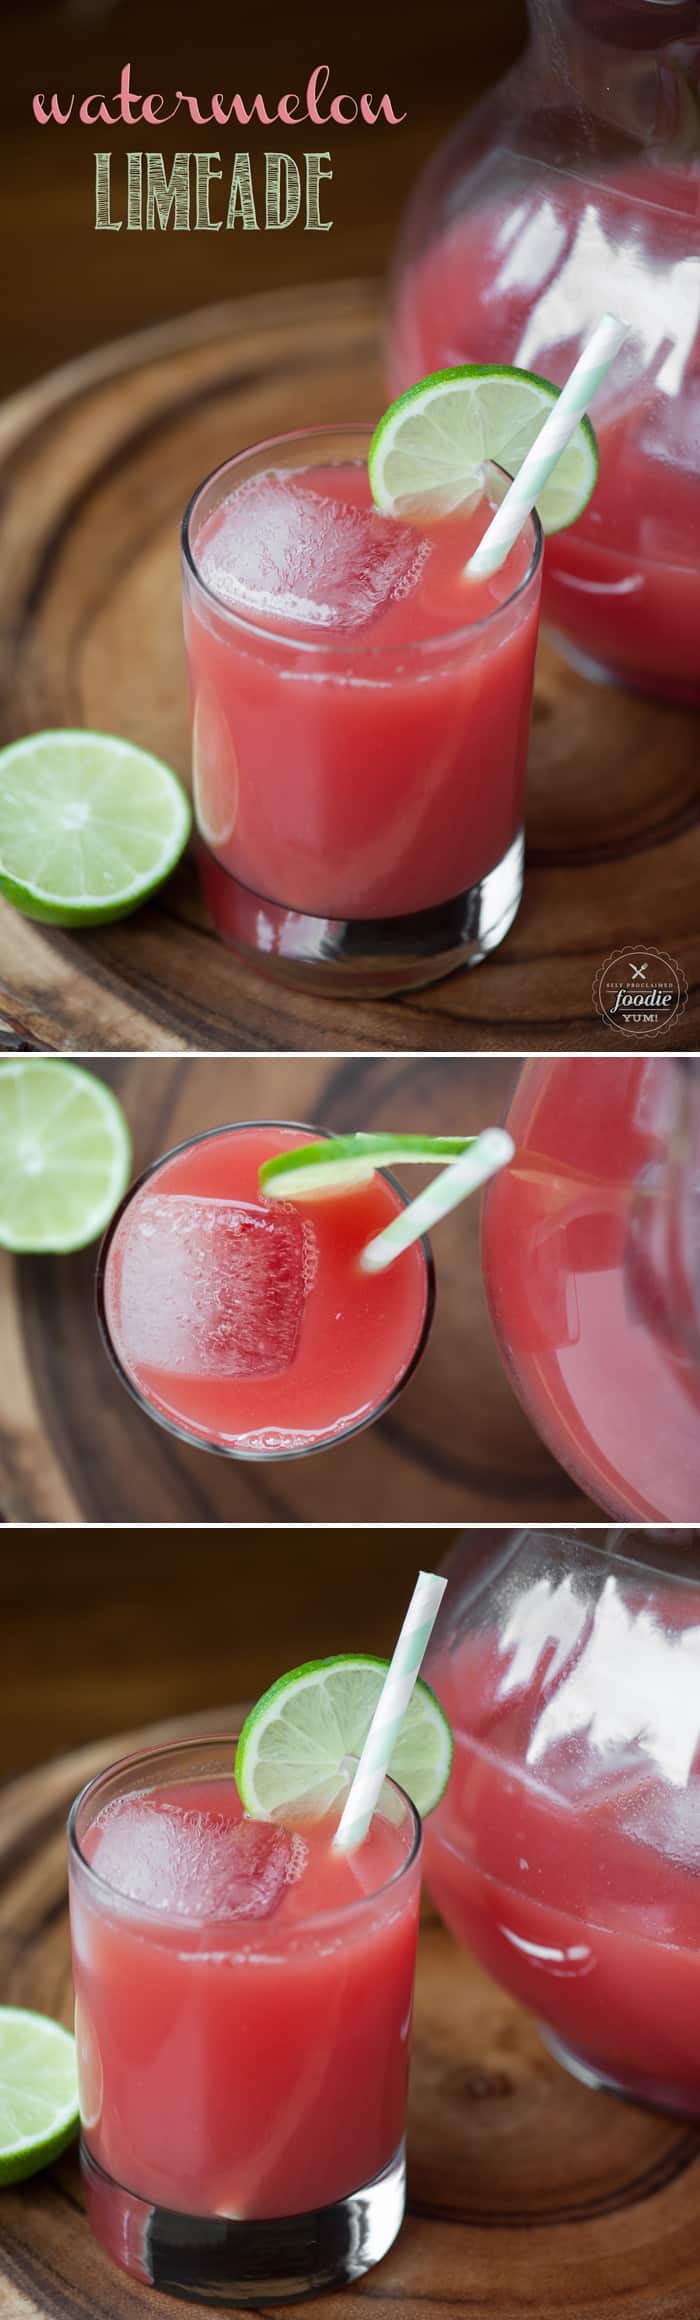 Watermelon Limeade is a refreshing and tasty summer drink made from fresh watermelon and limes, perfect for all ages on a hot summer day.